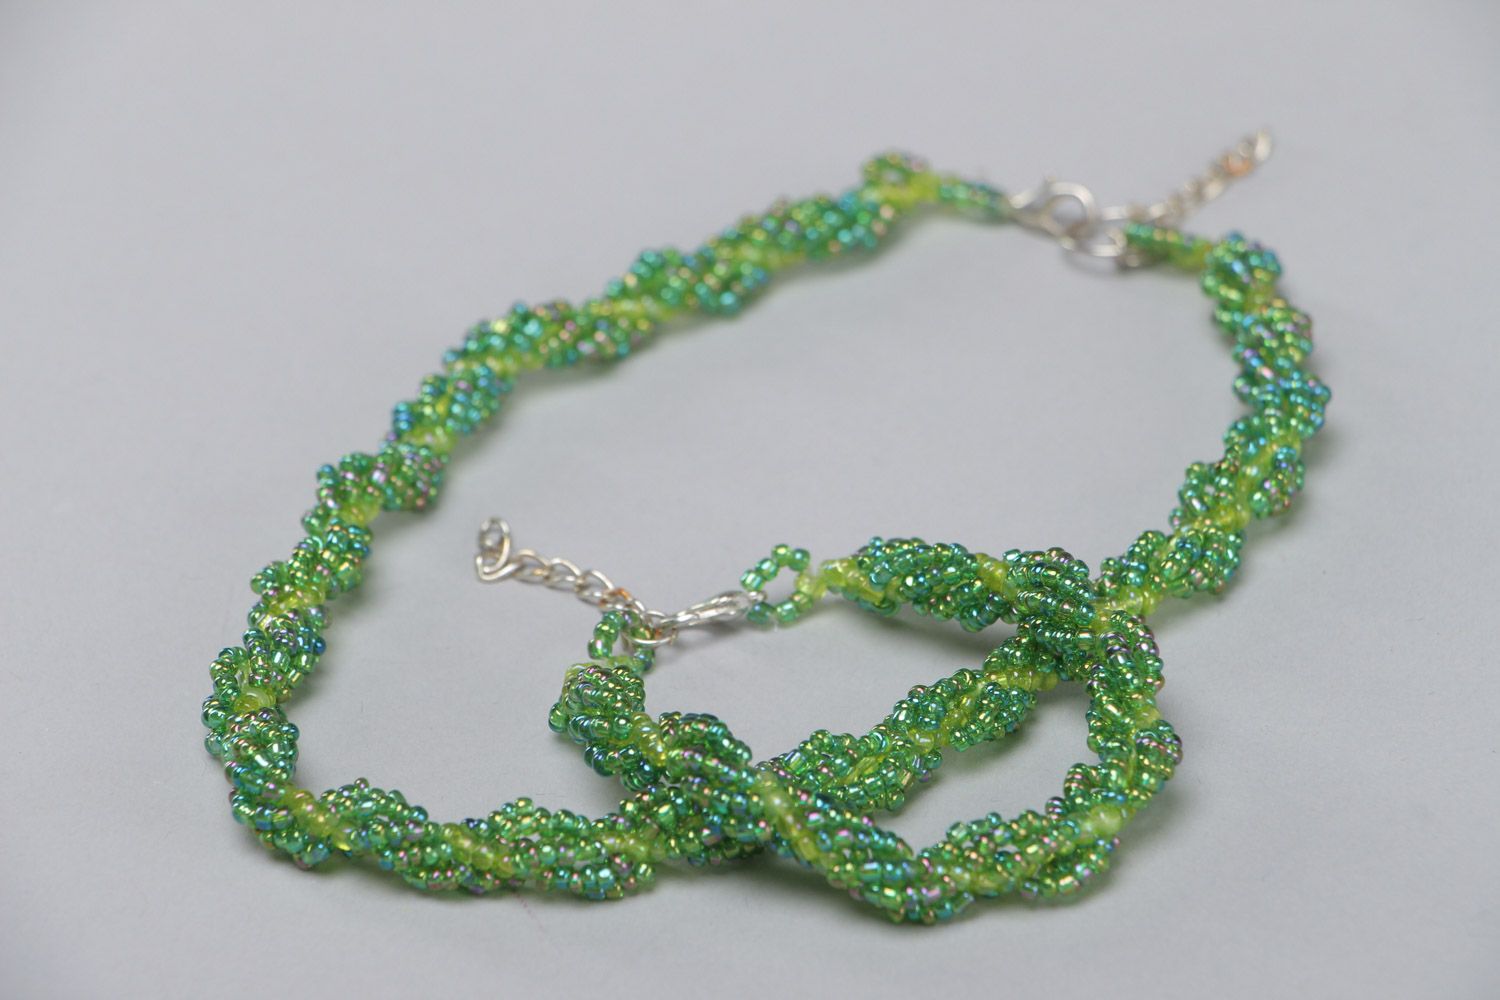 Handmade green woven beaded jewelry set 2 items bracelet and necklace photo 3